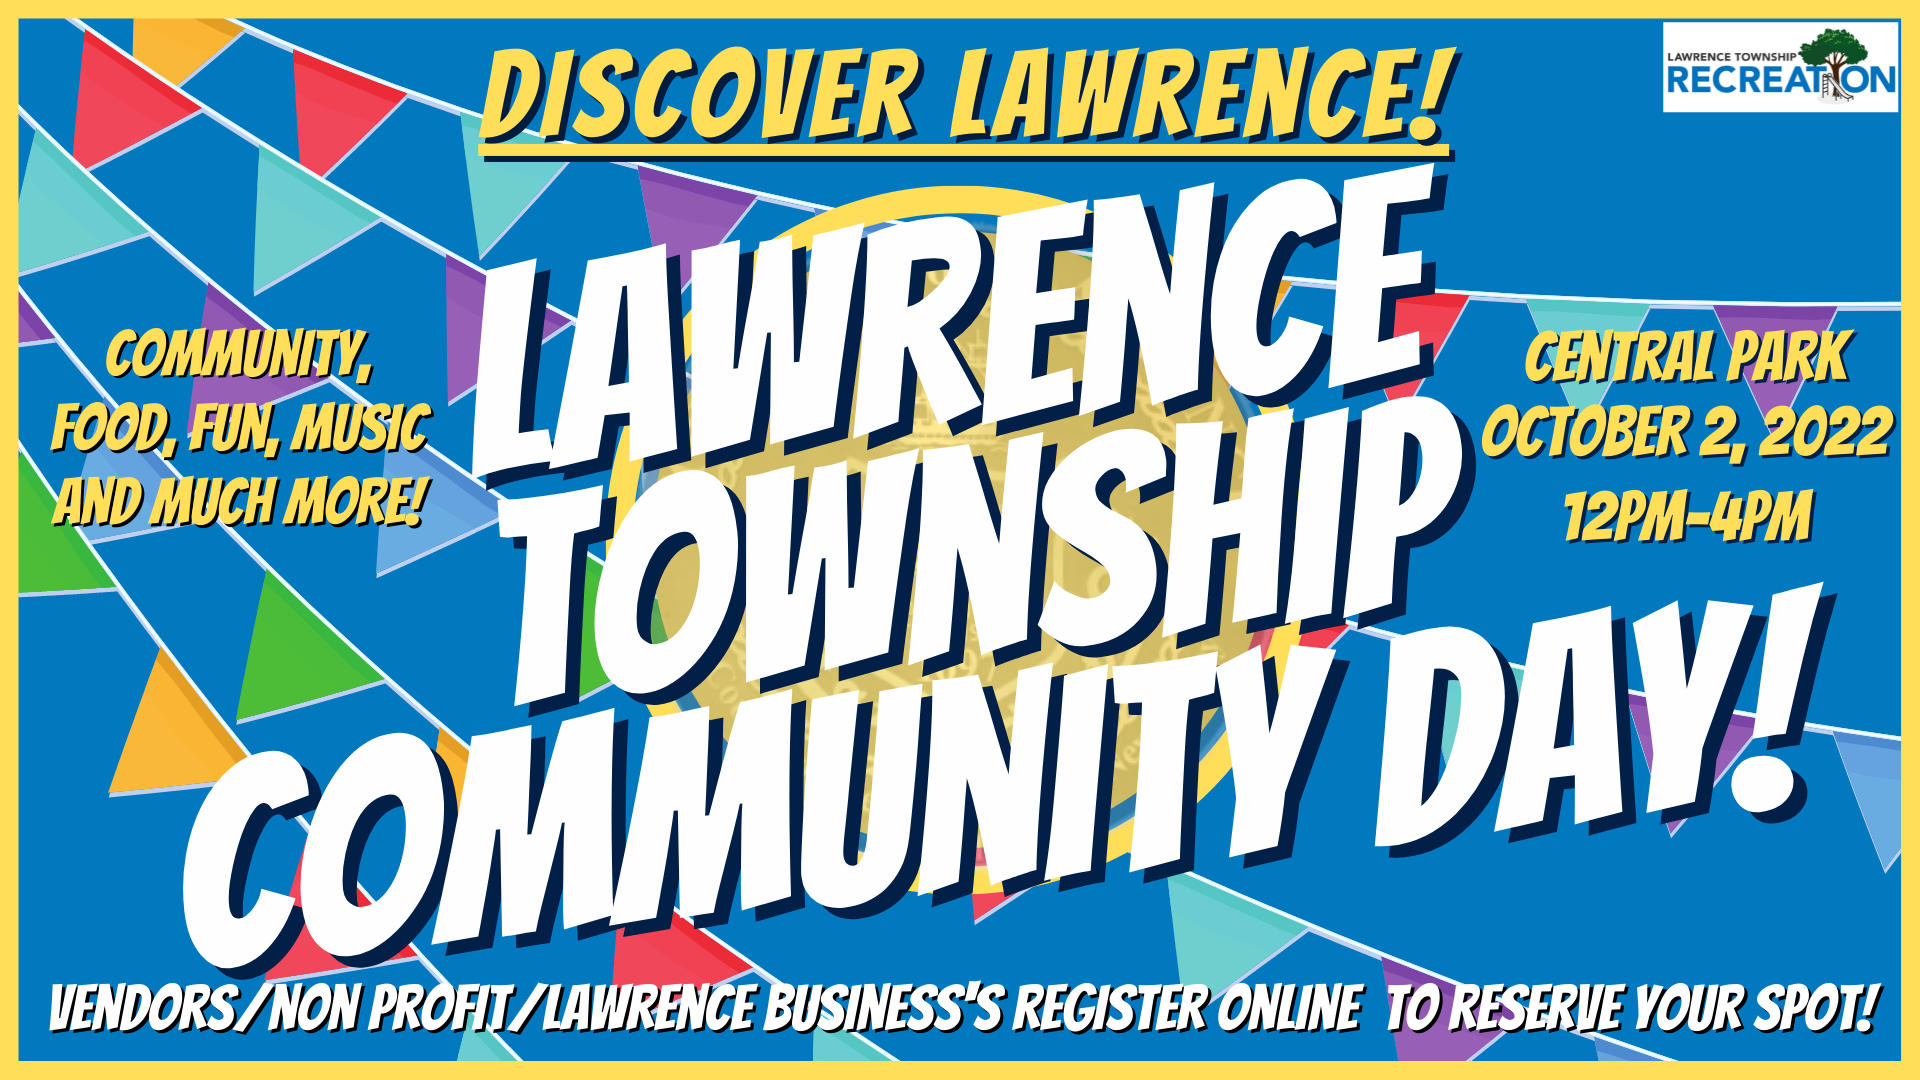 lawrence township recreation